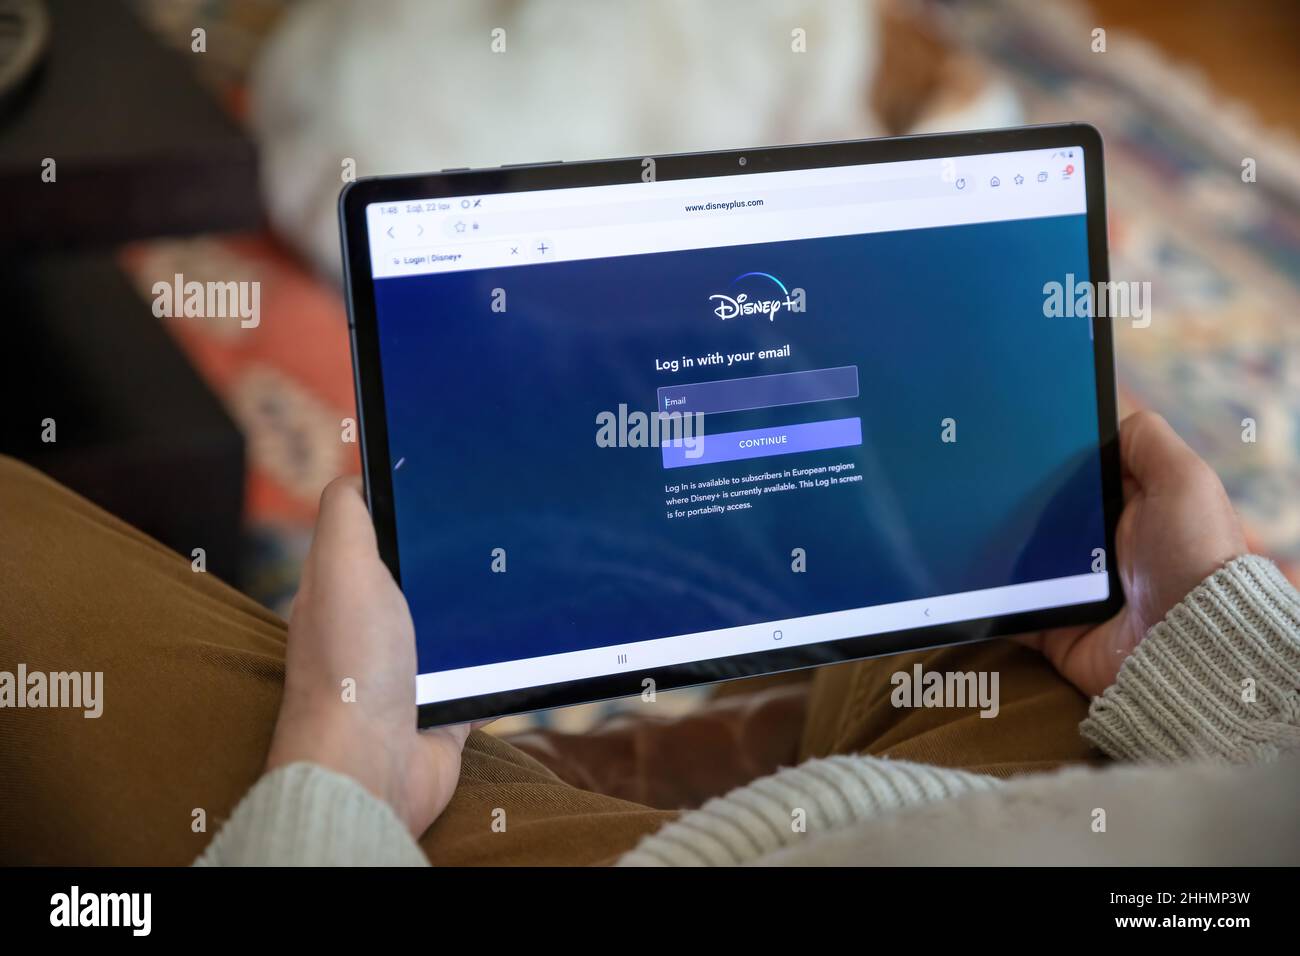 Greece Athens, January 23 2022. Disney plus, online video streaming subscription service logo on digital tablet screen. Stock Photo